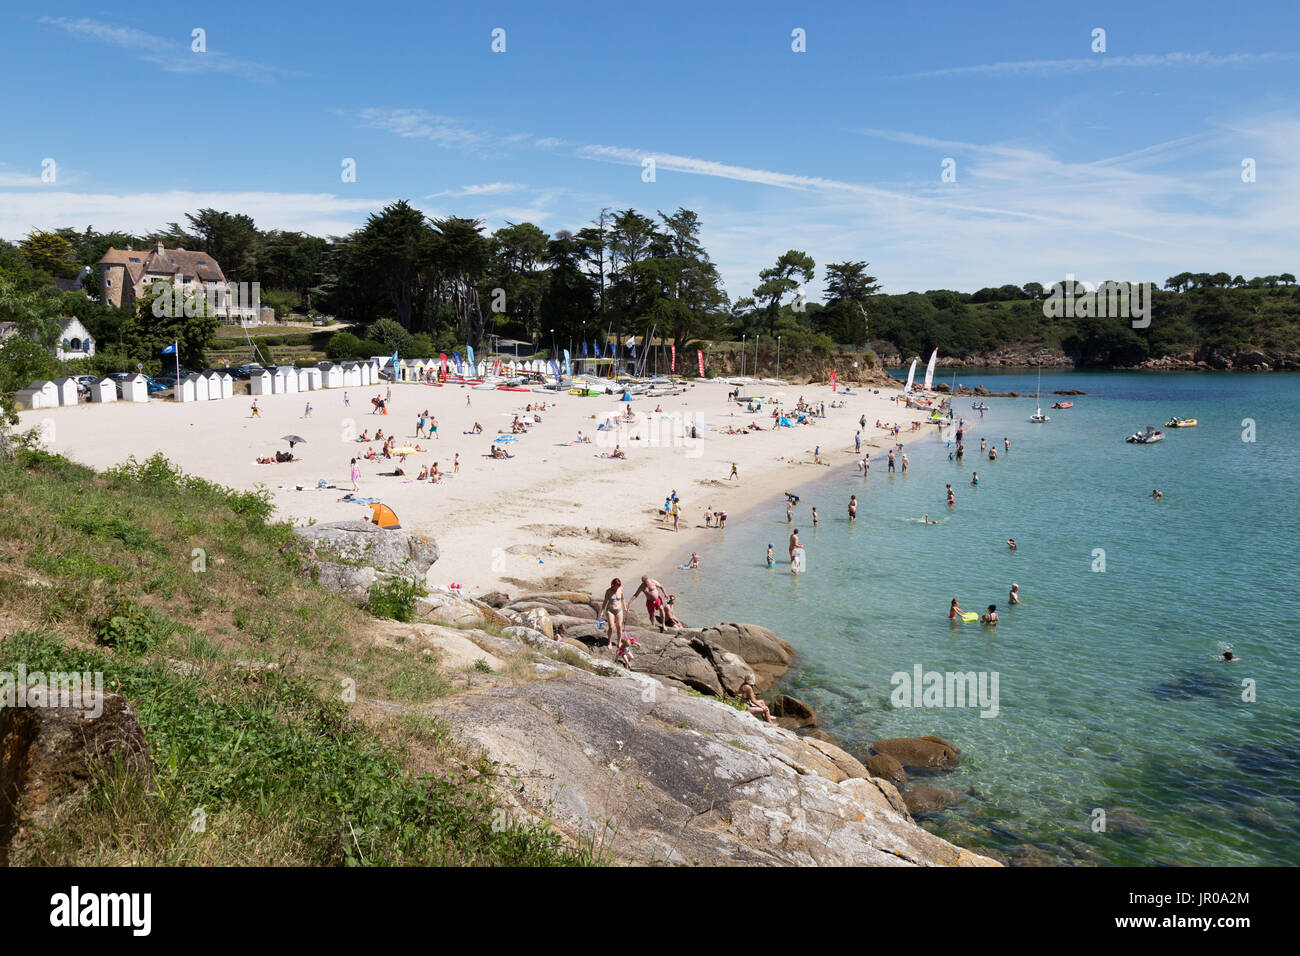 Brittany beach - the sandy beach at Port Manec'h, Finistere, Brittany, France Stock Photo